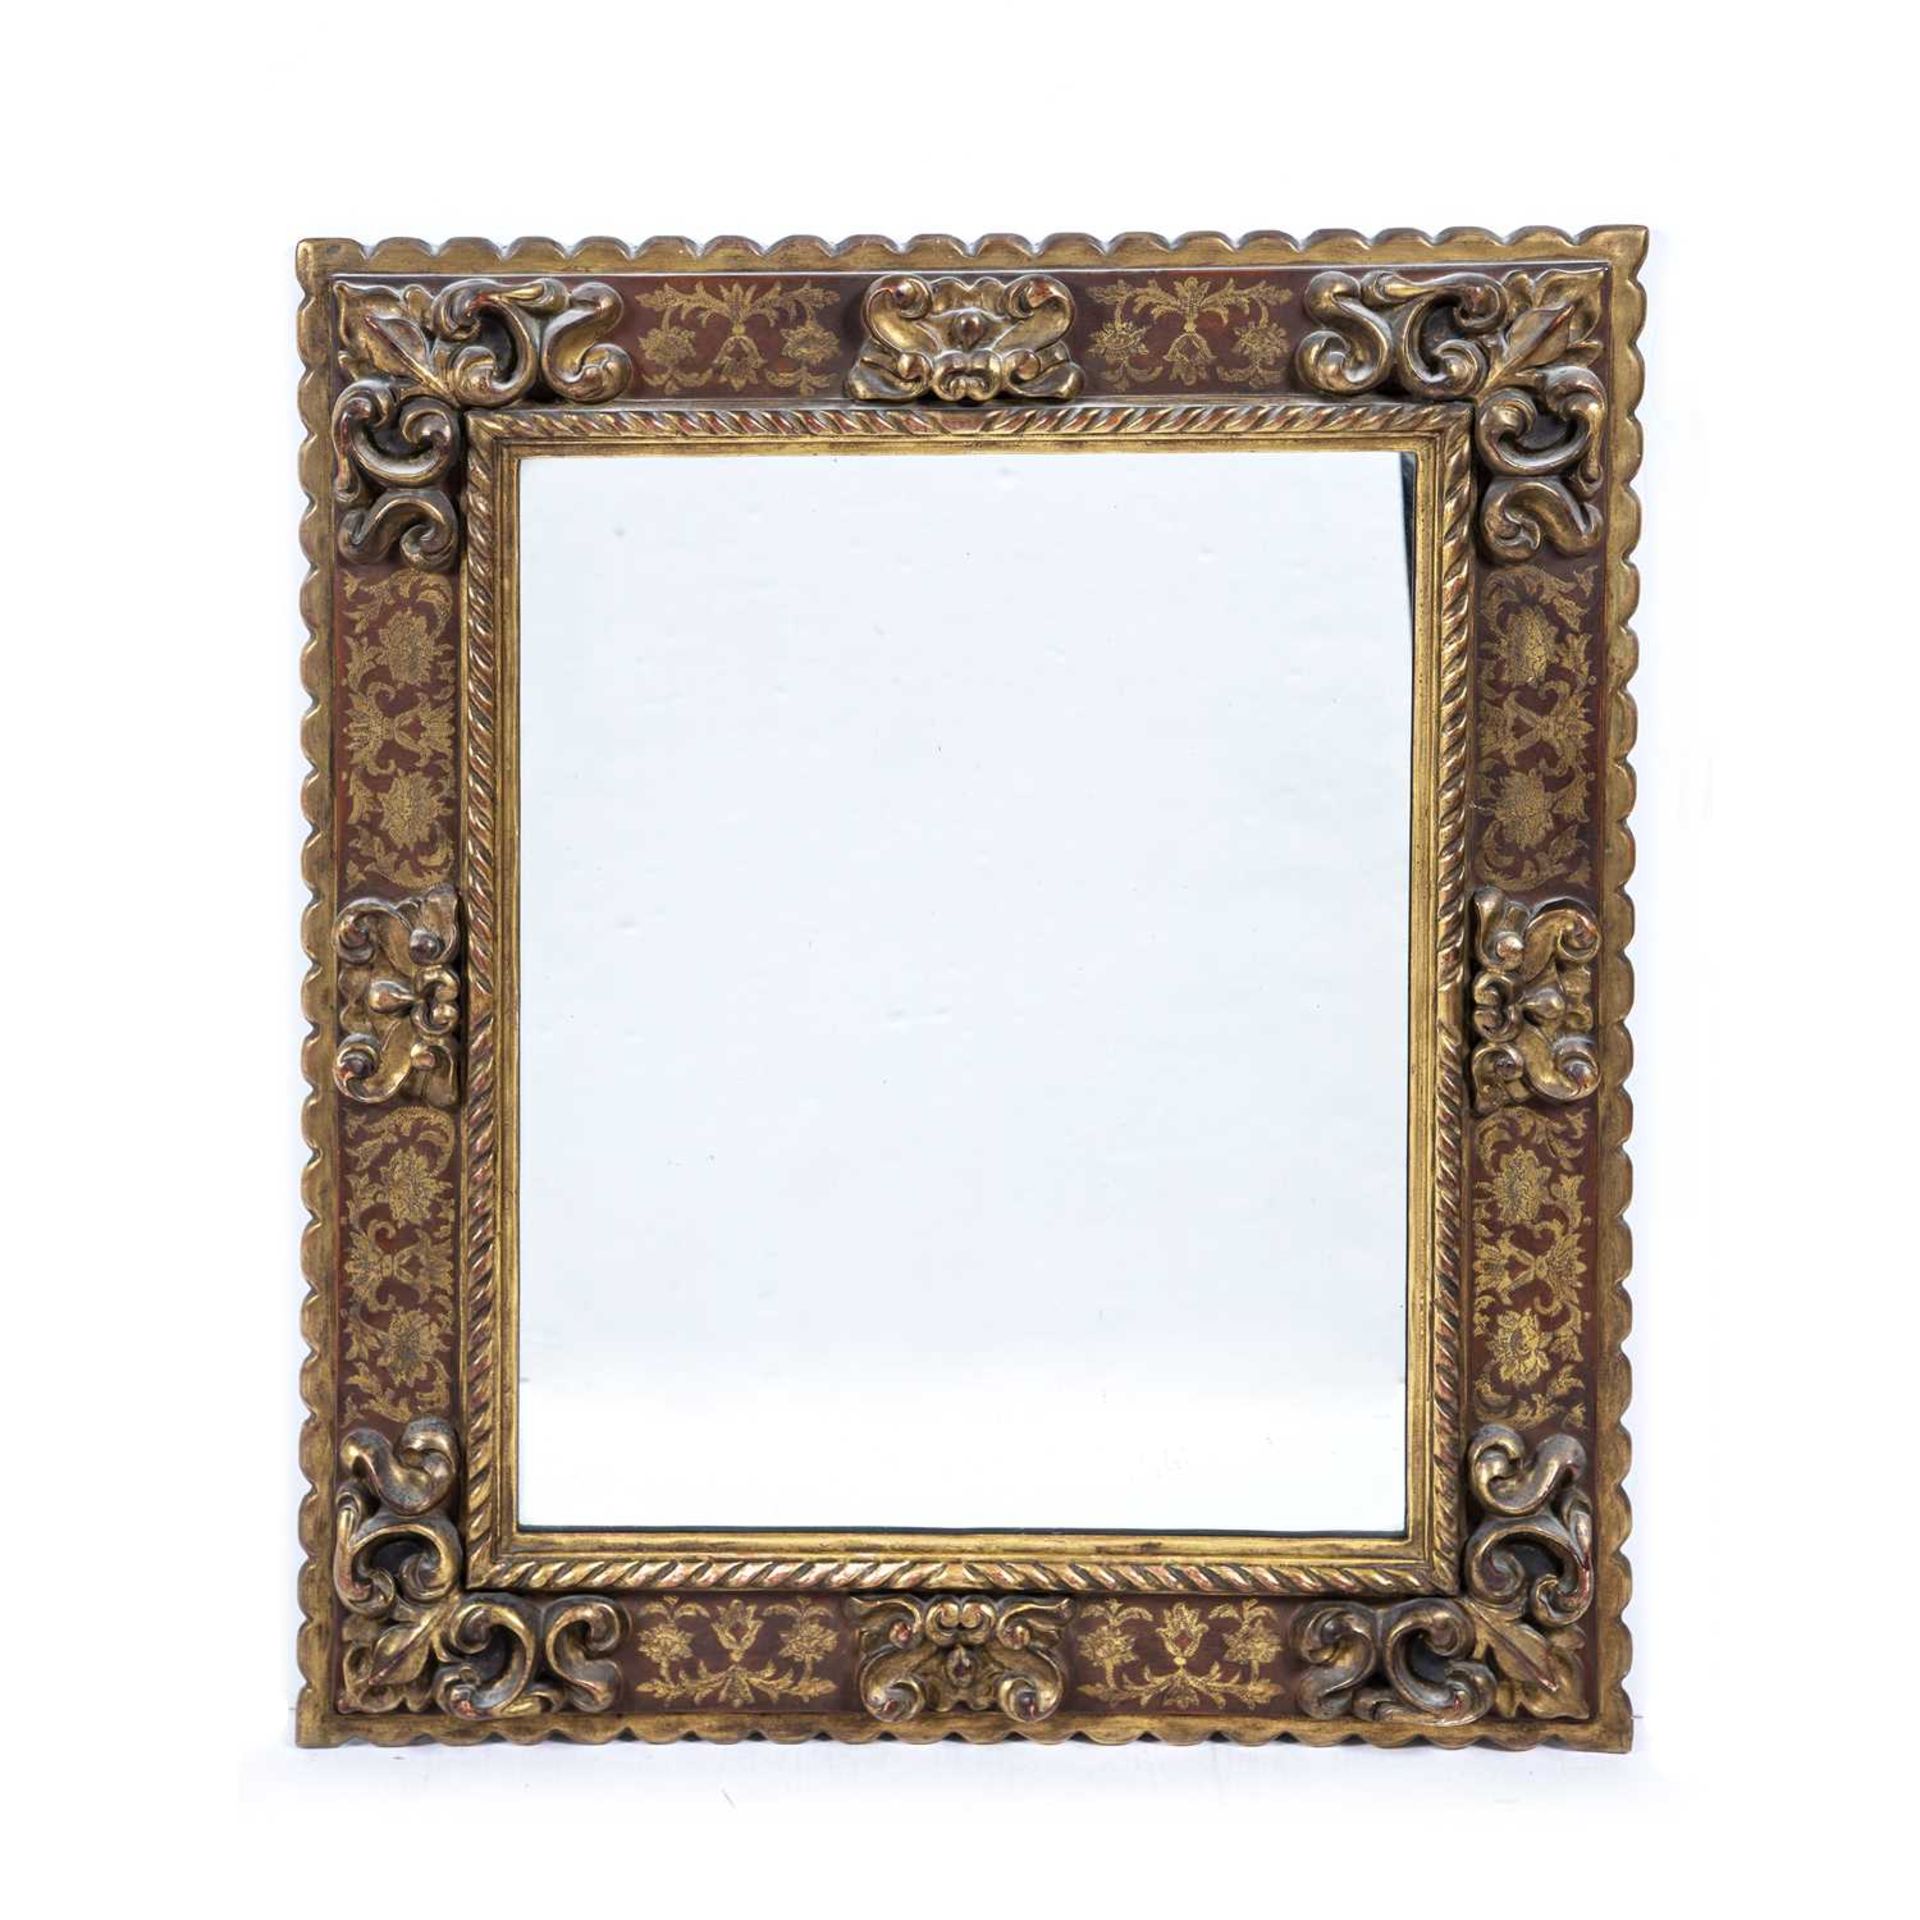 Giltwood Flemish style mirror with a carved frame, 86cm x 71cmA few light marks and some wear.